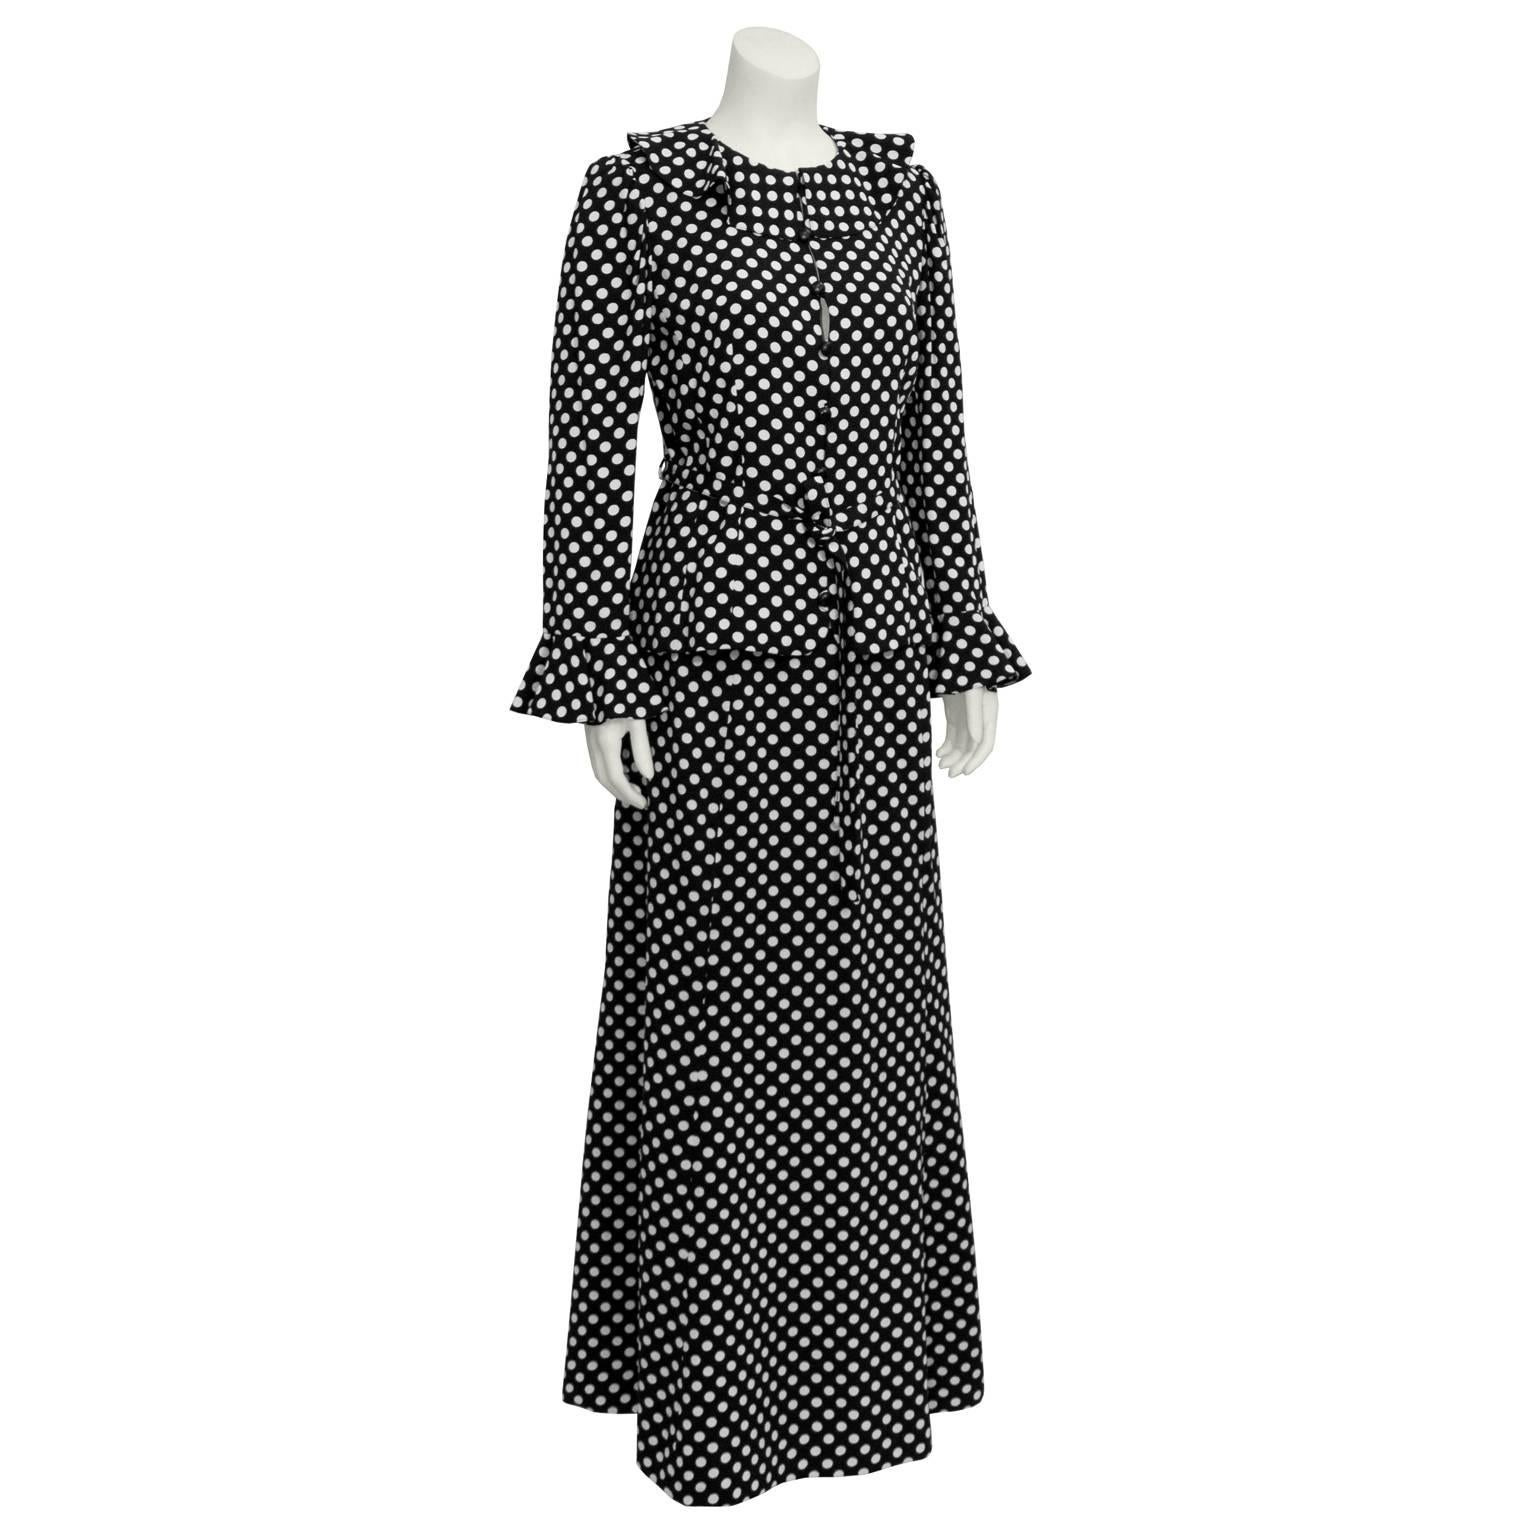 A fabulous moss crepe polka dot long skirt ensemble from Yves Saint Laurent dating from the 1970's. Swallowtail blazer has a ruffled Peter Pan collar with cascading ends. Button closure down center with a waist belt. Shoulders are slightly puffed,